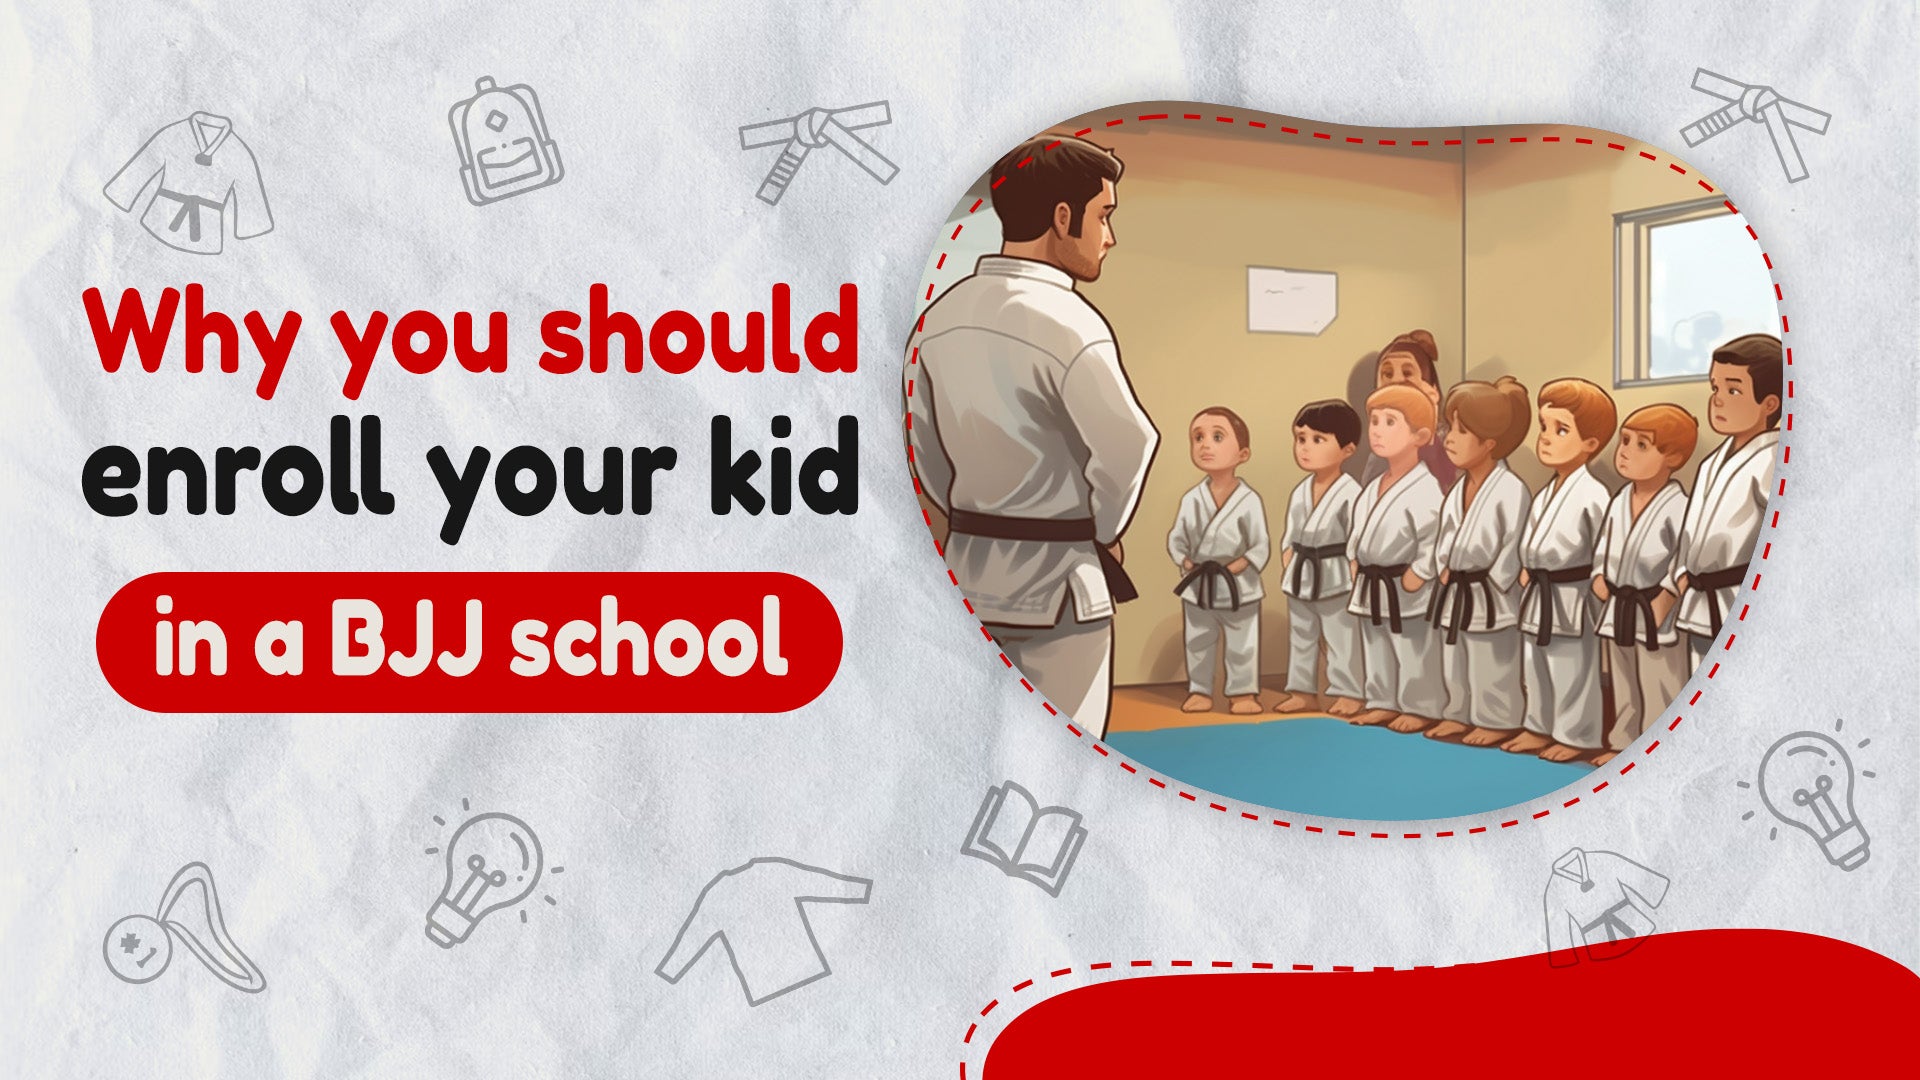 Why You Should Enroll Your Kid in a BJJ School